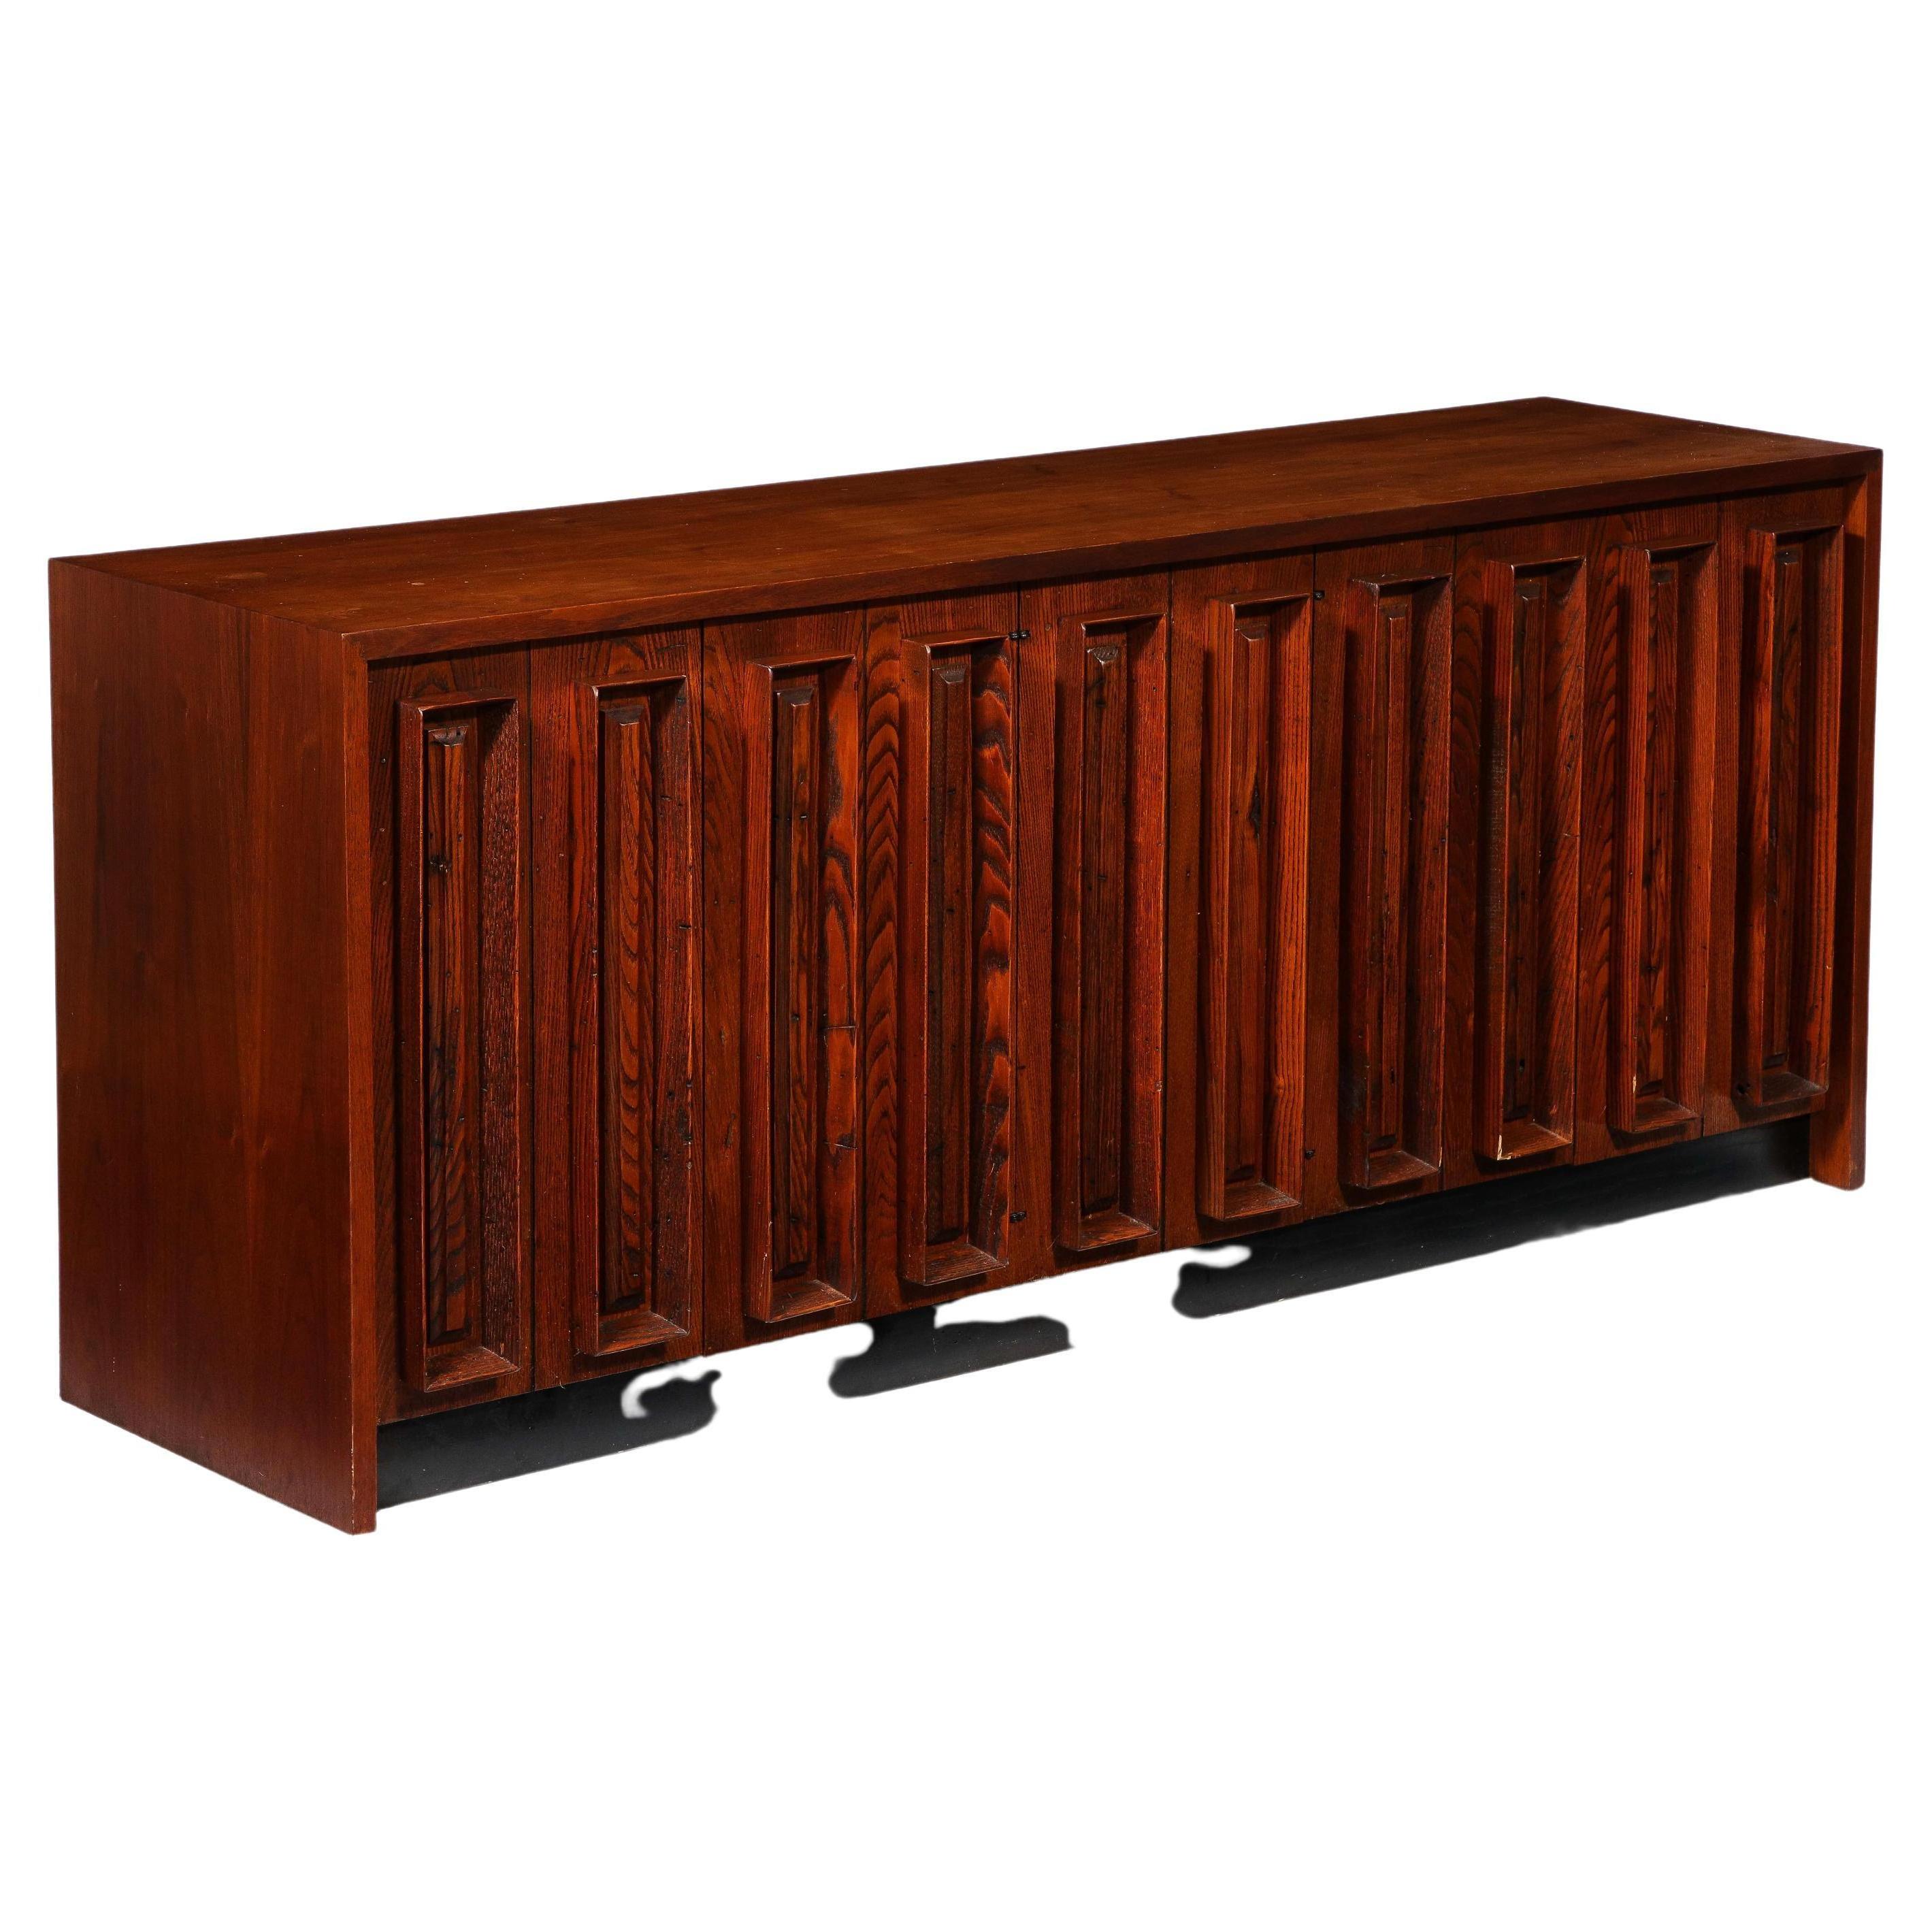 Stunning oak credenza on a black plinth with vertical slotted decor, it has five doors and multiple drawers and shelves. Very versatile design that can be used as storage or a multimedia unit.